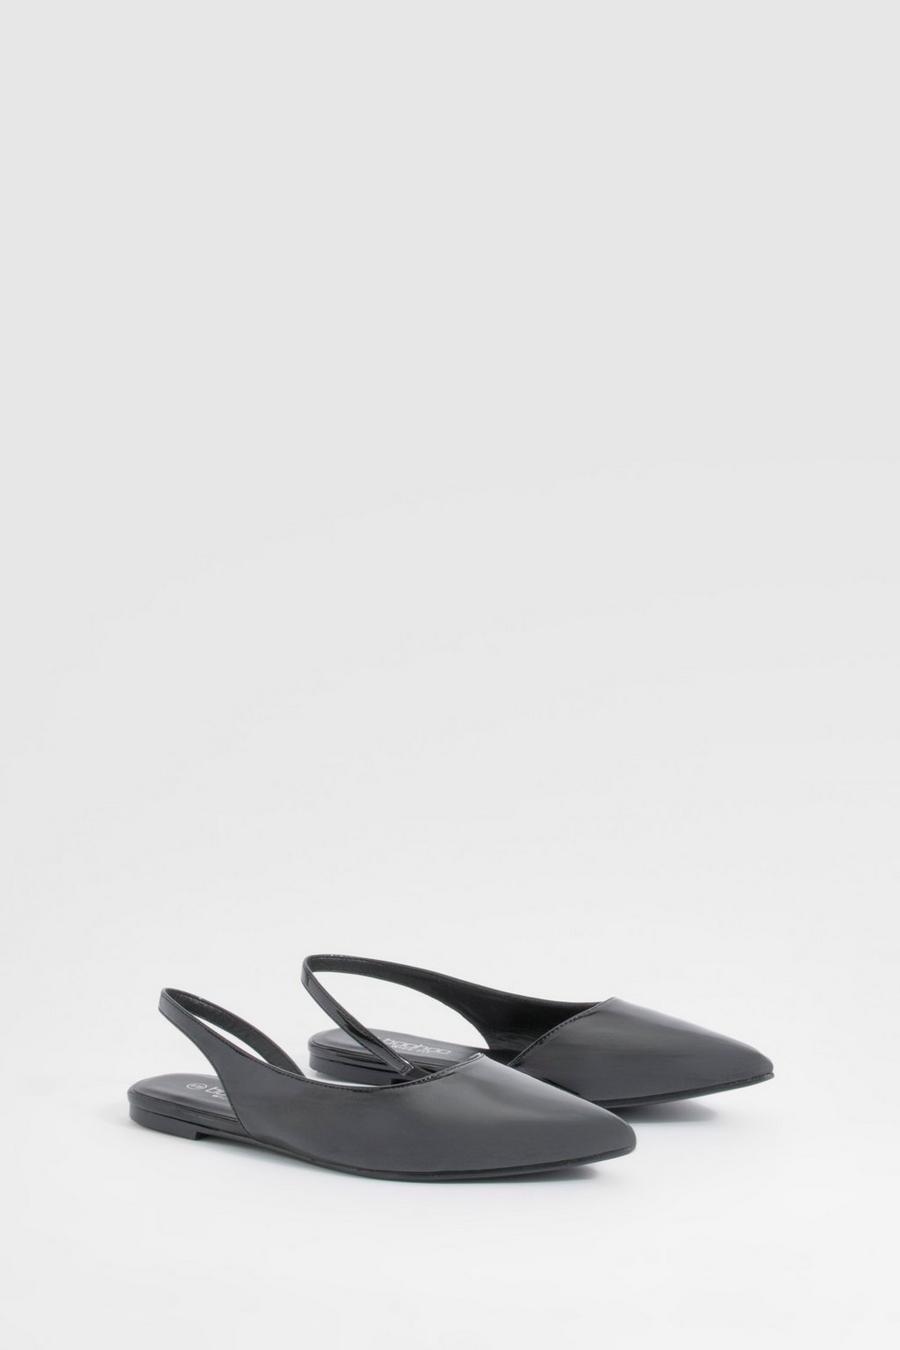 Black gianvito rossi exclusive to mytheresa manhattan 105 suede sandals